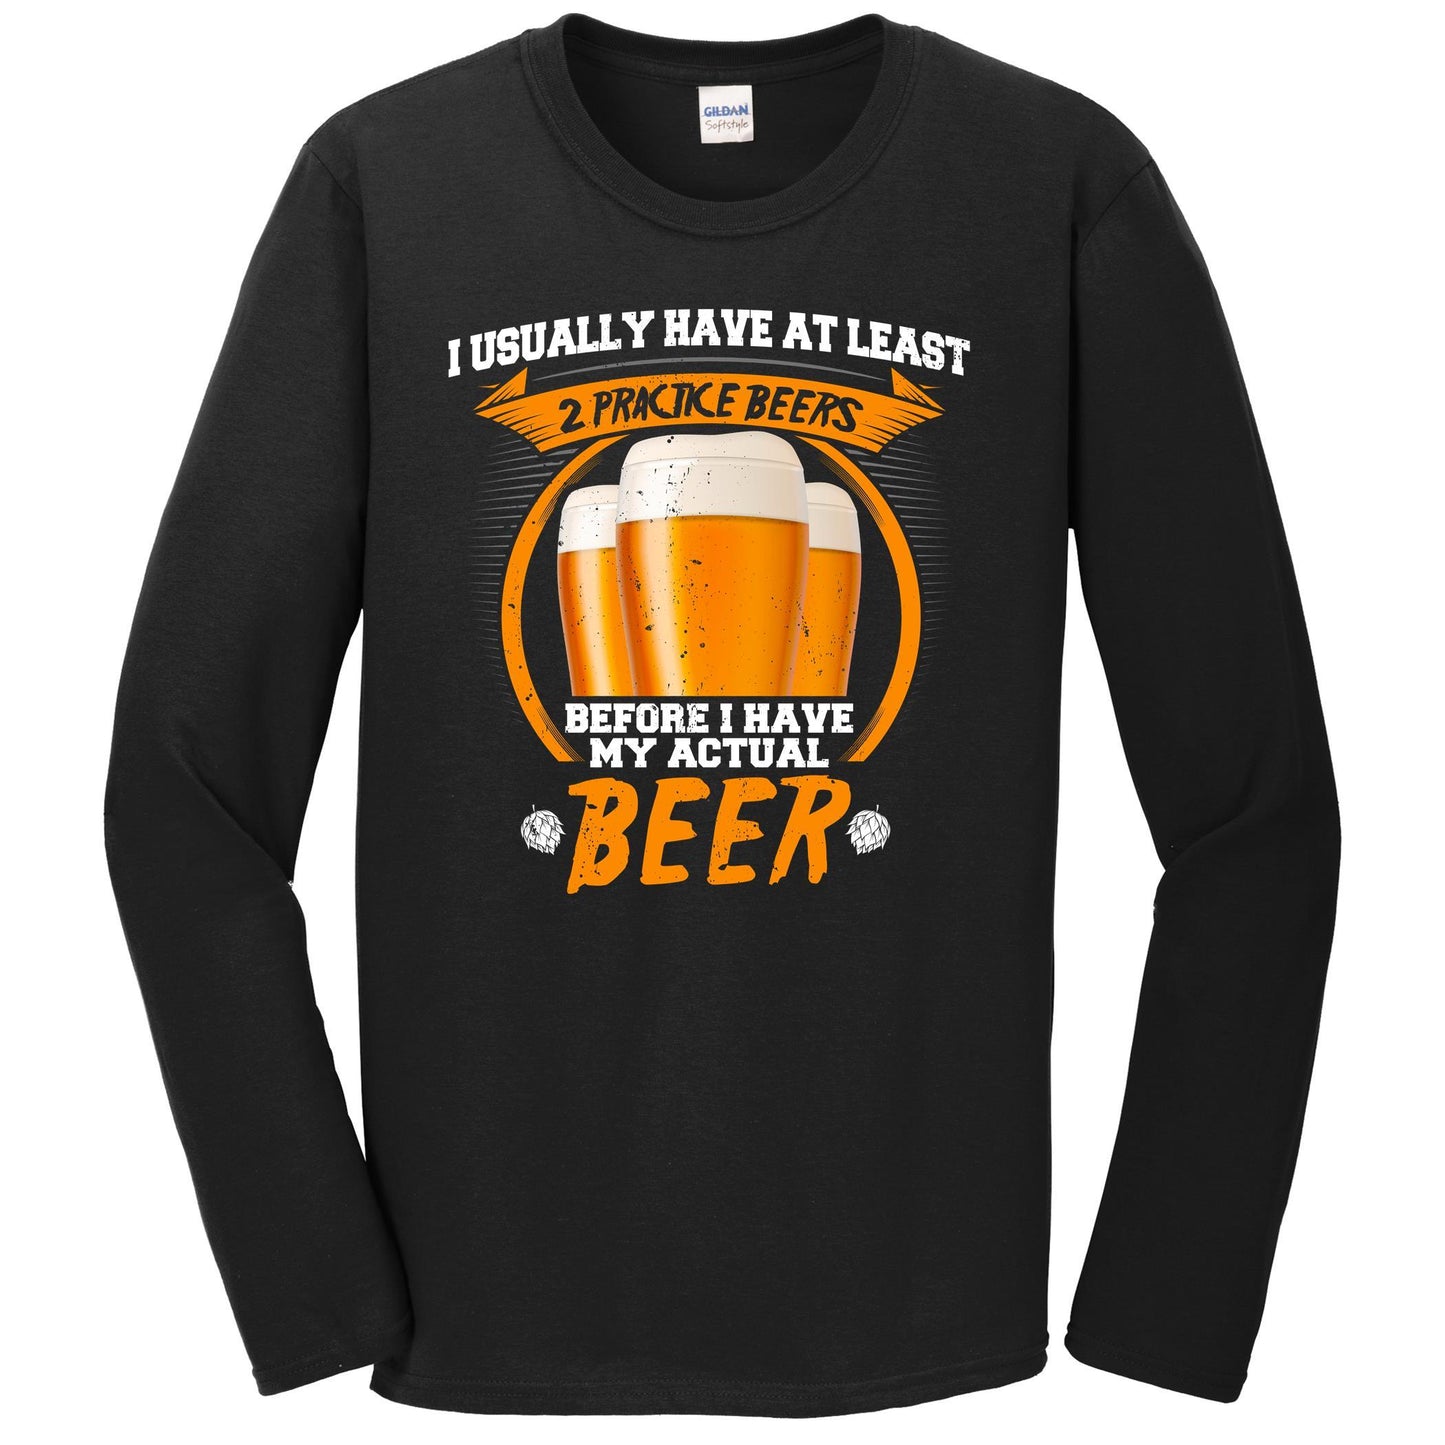 I Usually Have At Least 2 Practice Beers Before I Have My Actual Beer Long Sleeve T-Shirt